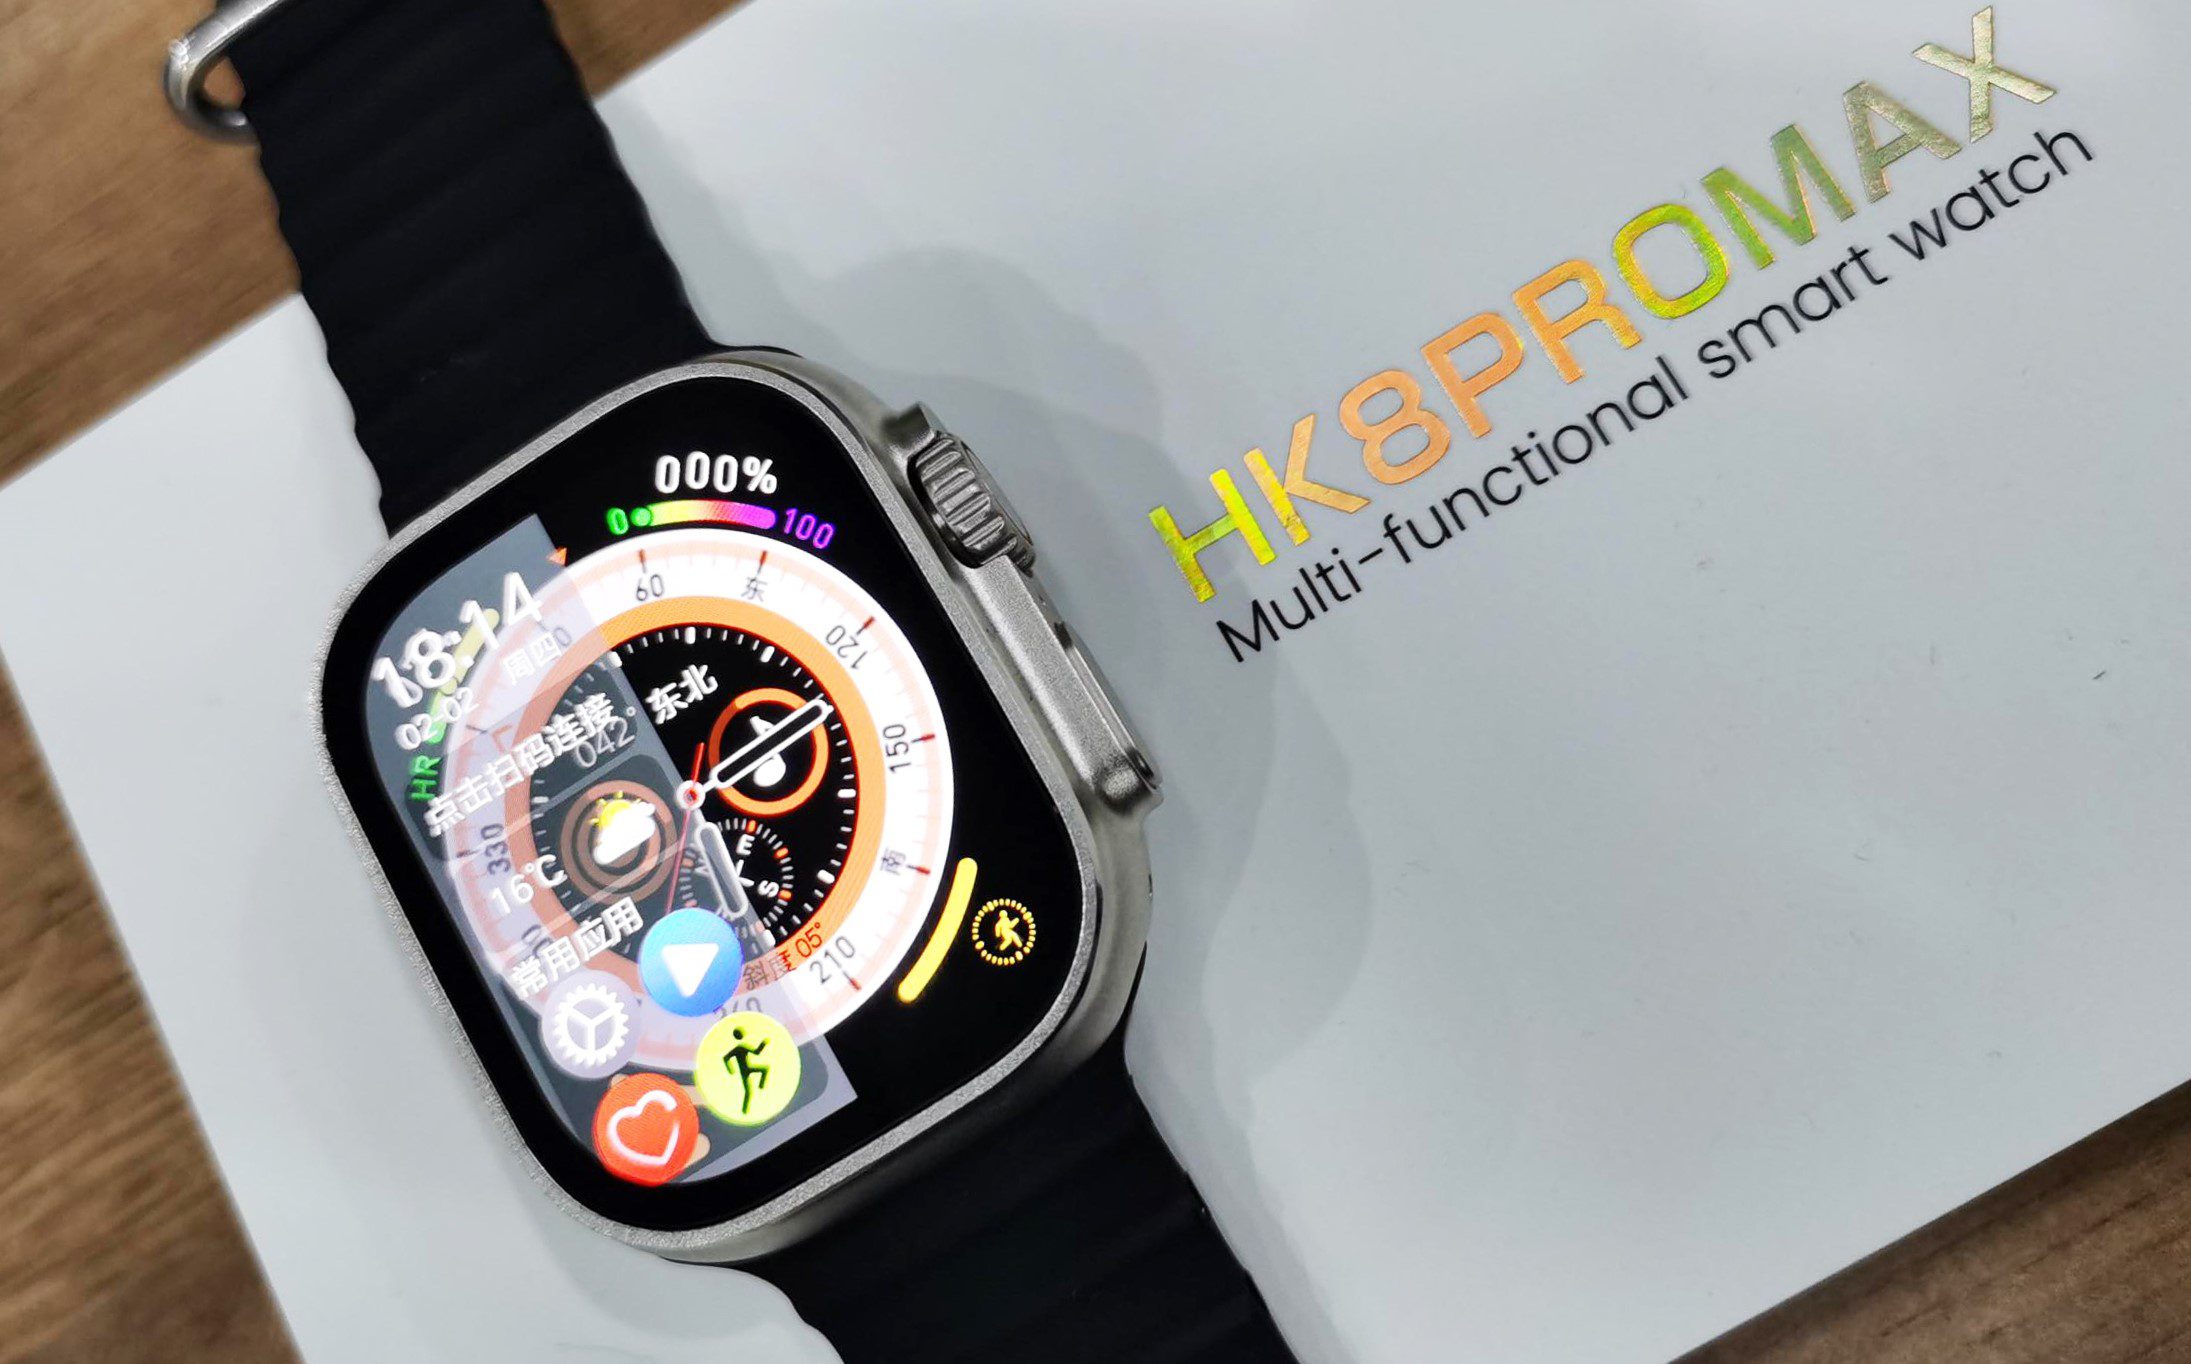 Hk8 Pro Max Amoled Display Ultra Series 8 at Rs 2100/piece, Bluetooth  Smart Watch in New Delhi